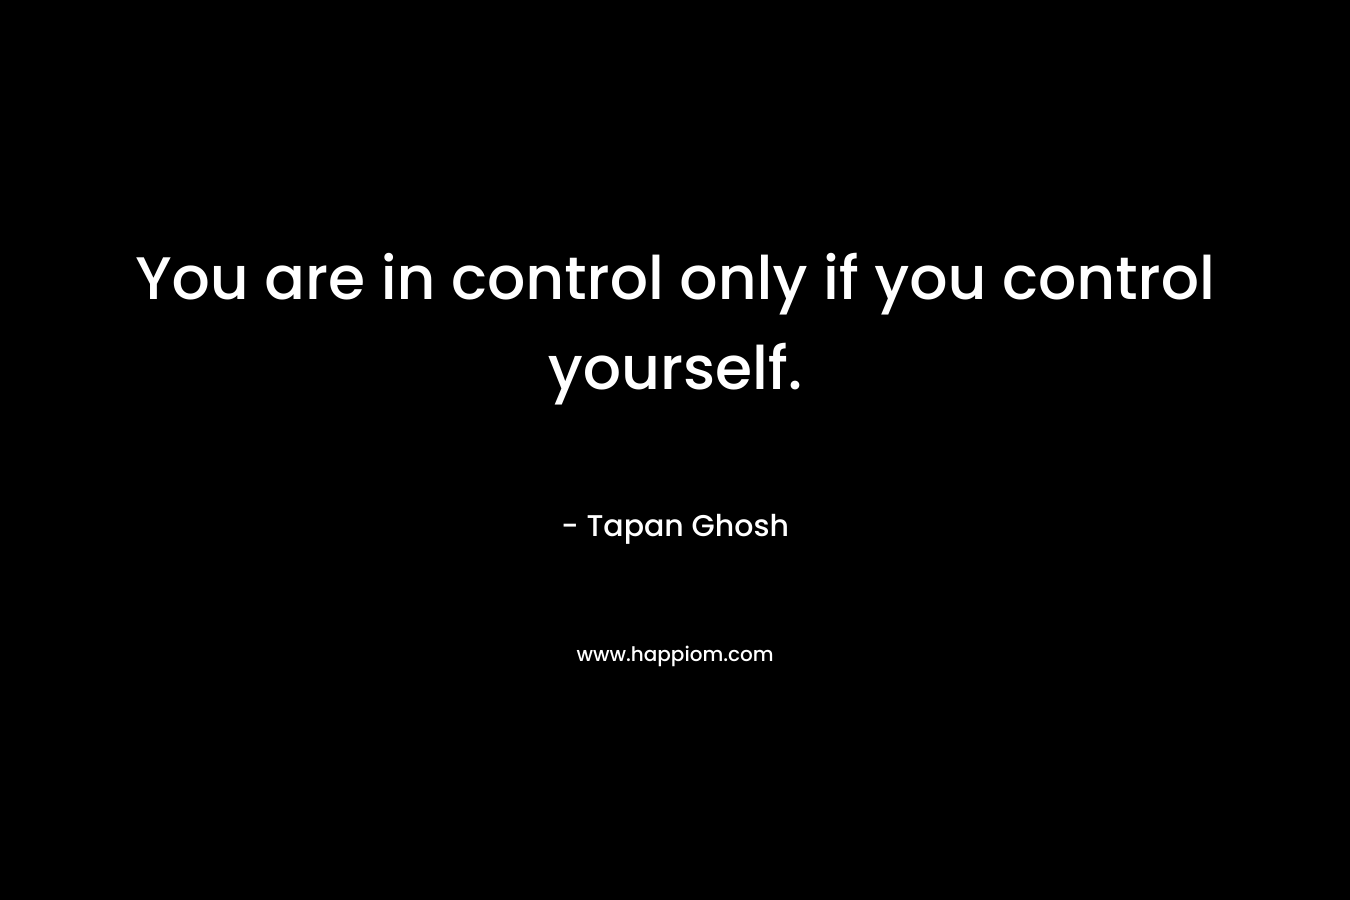 You are in control only if you control yourself.